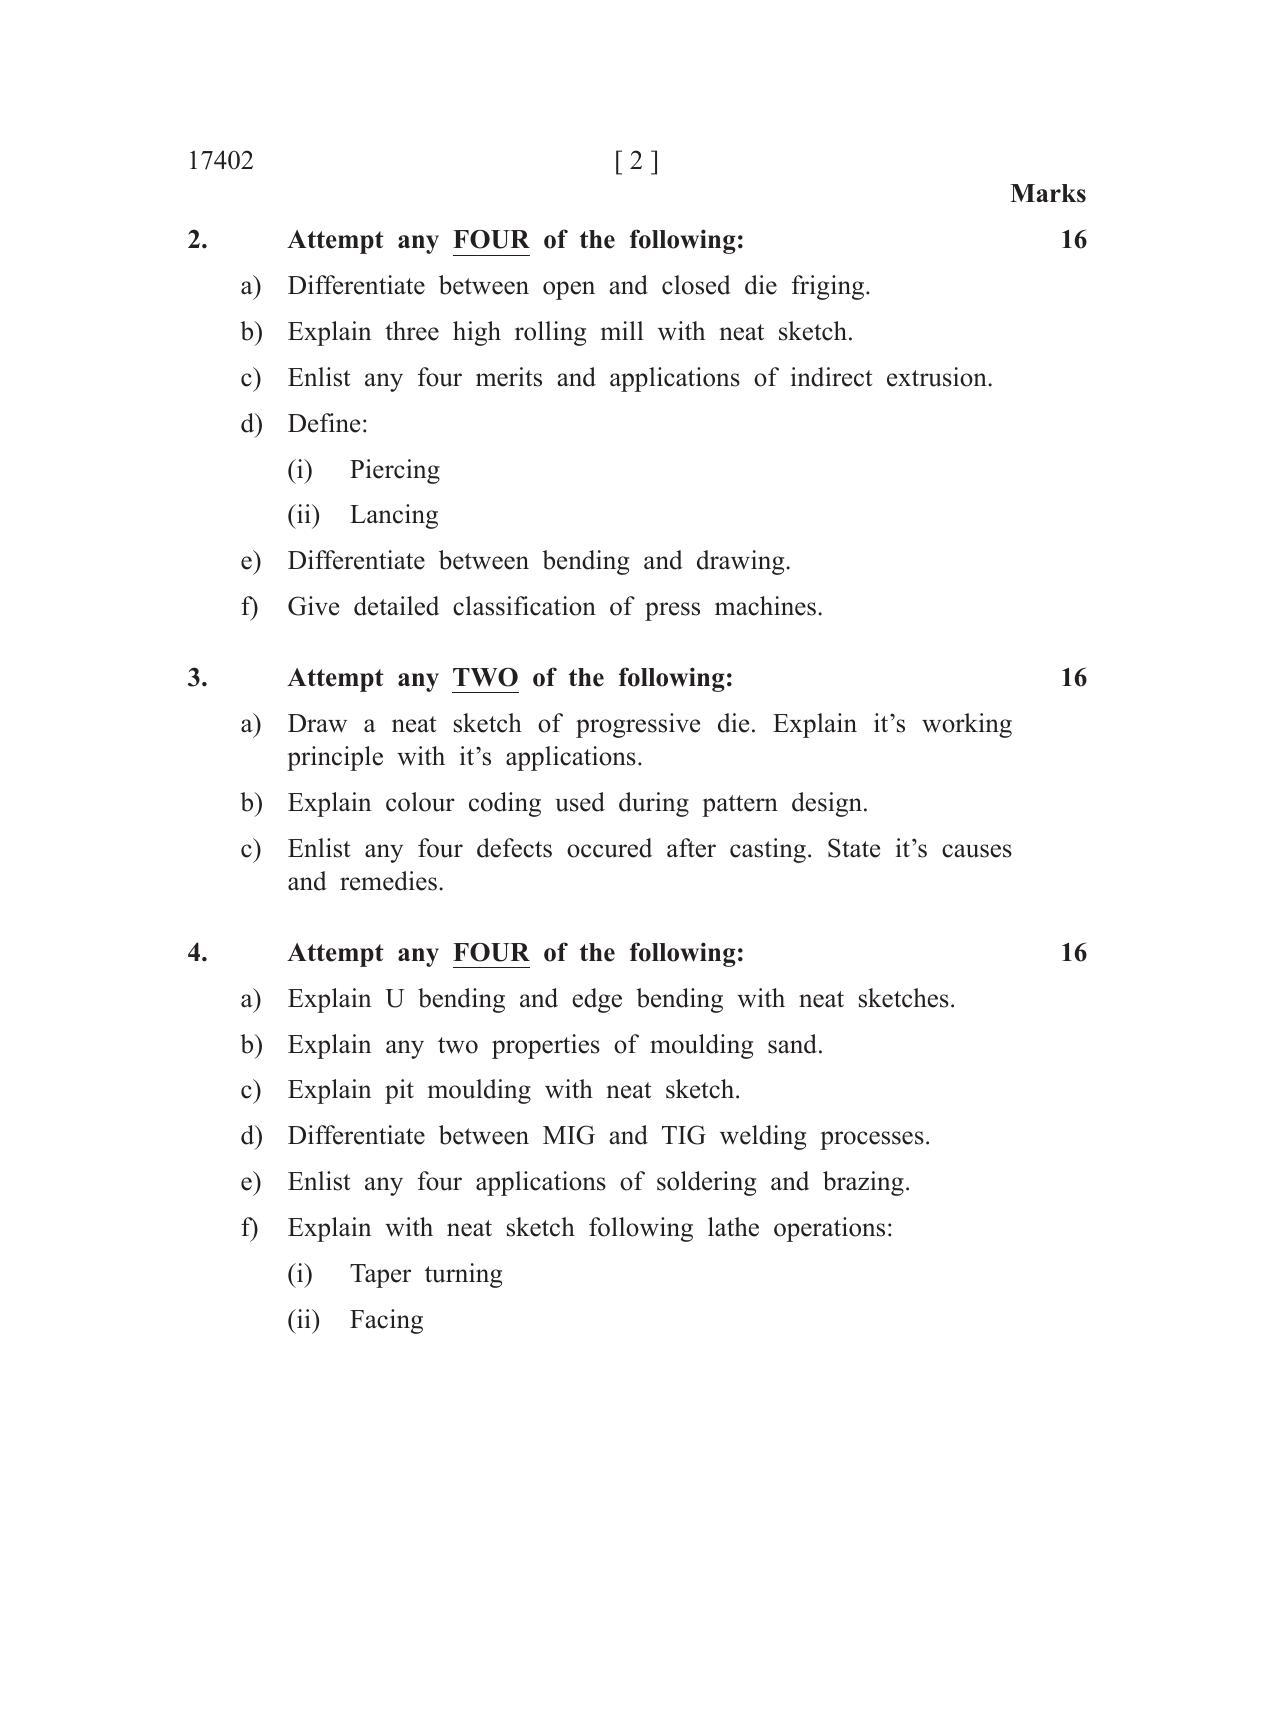 MSBTE Question Paper - 2018 - Manufacturing Processes - Page 2